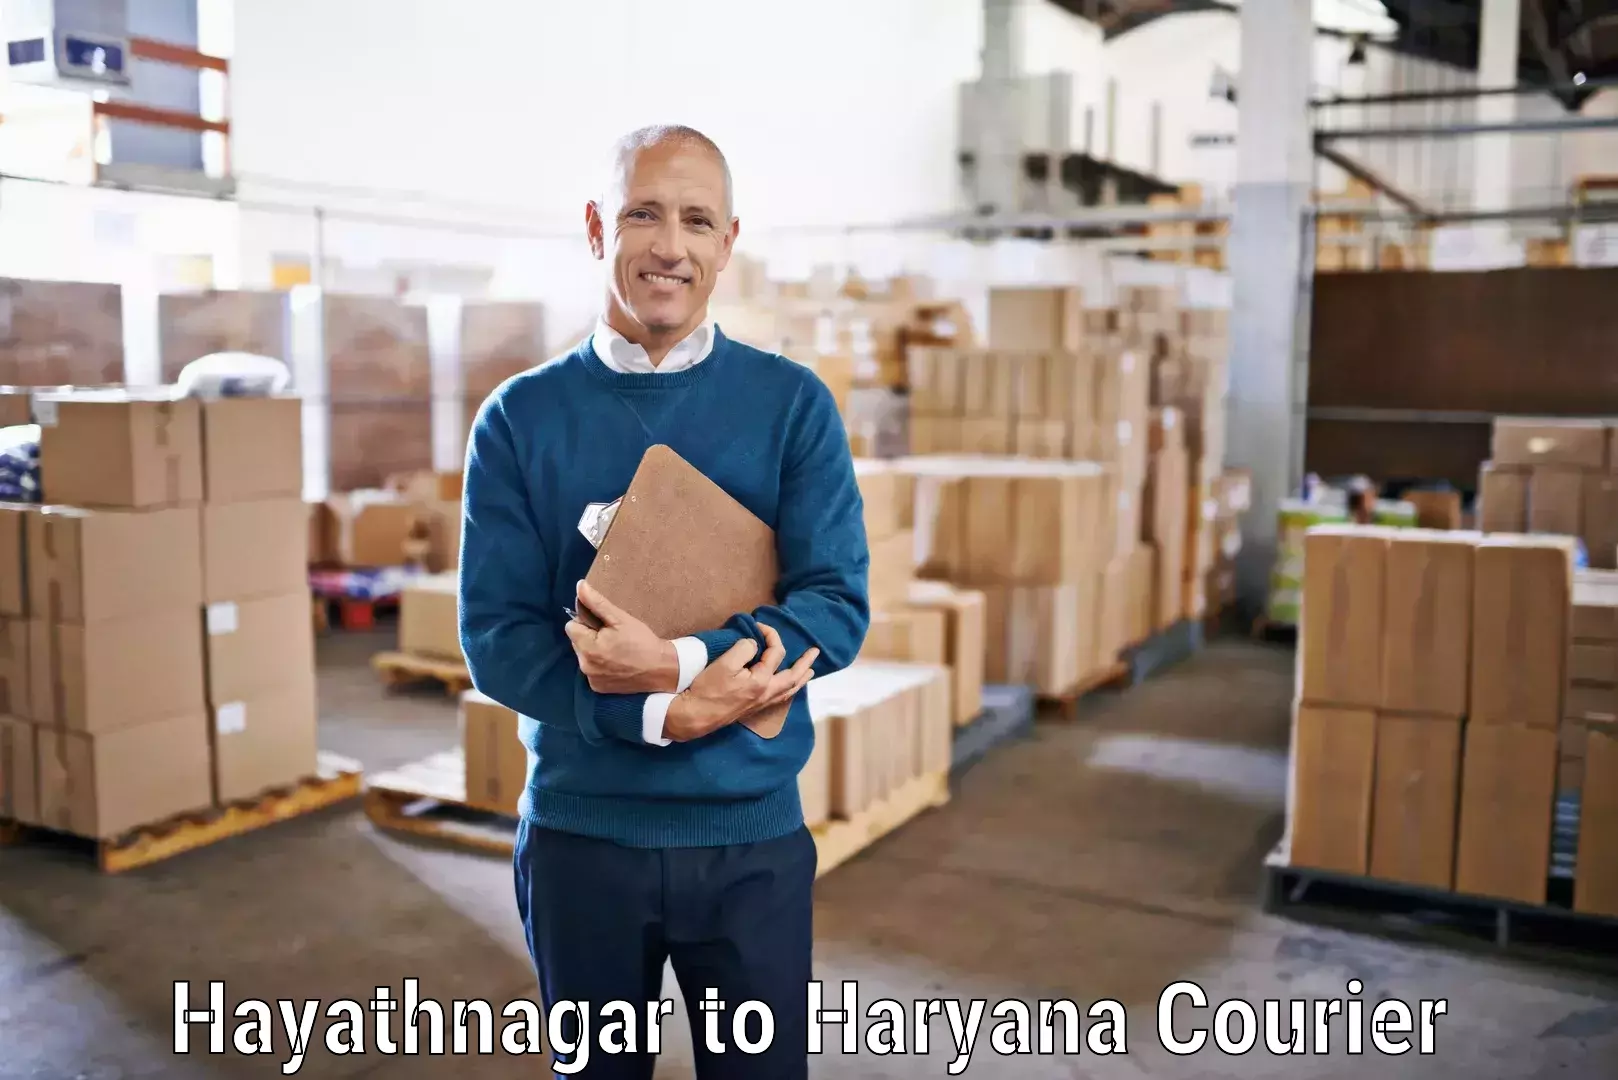 Efficient courier operations Hayathnagar to Sonipat